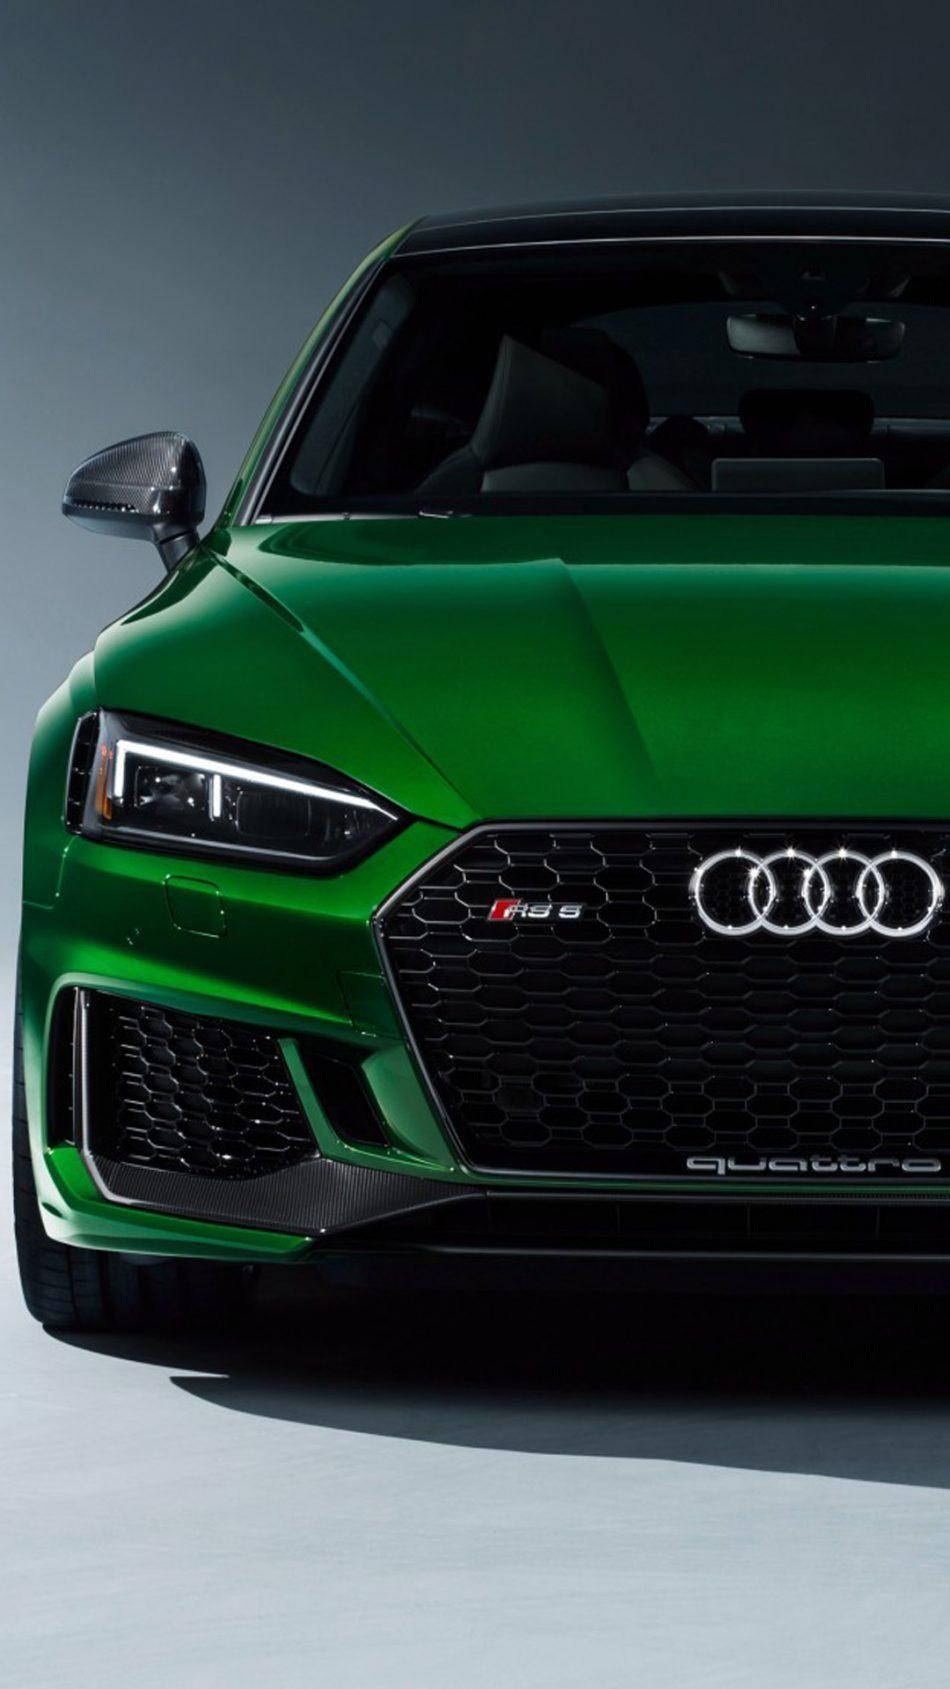 Caption: Striking Green 2019 Audi Rs 5 In High Definition Background